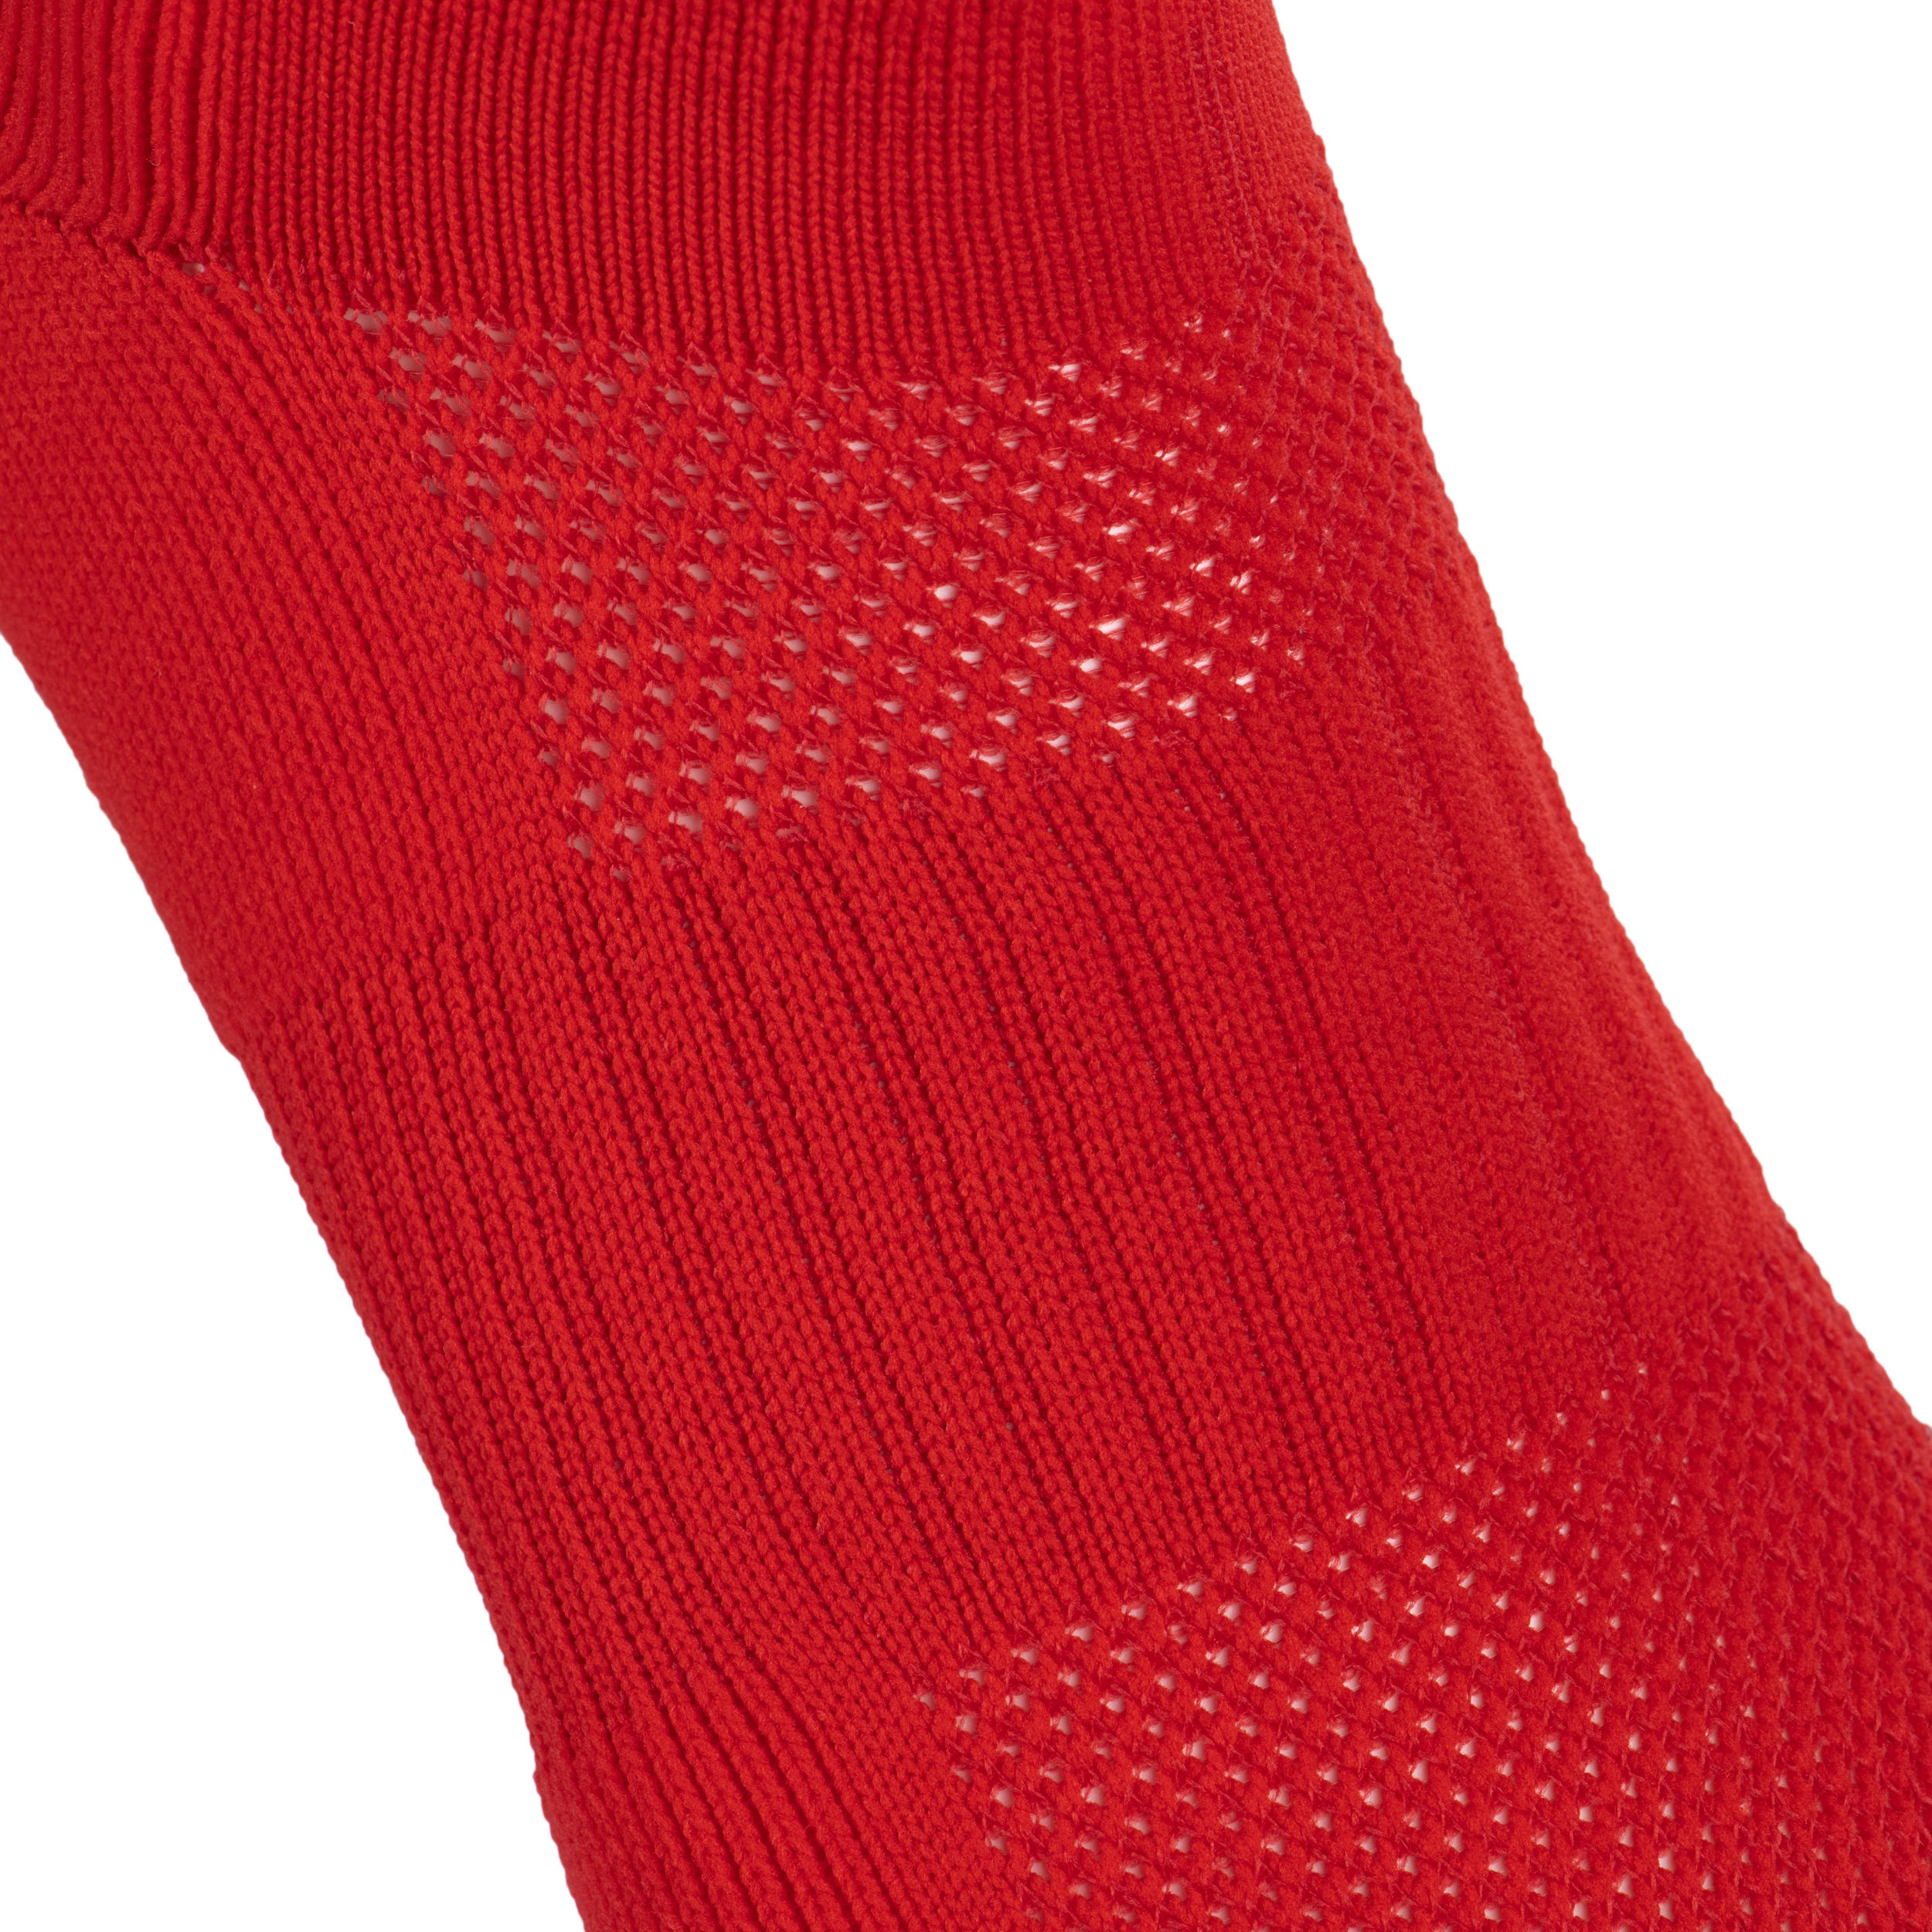 Men's/Women's High Rugby Socks R500 - Red/Yellow 5/5